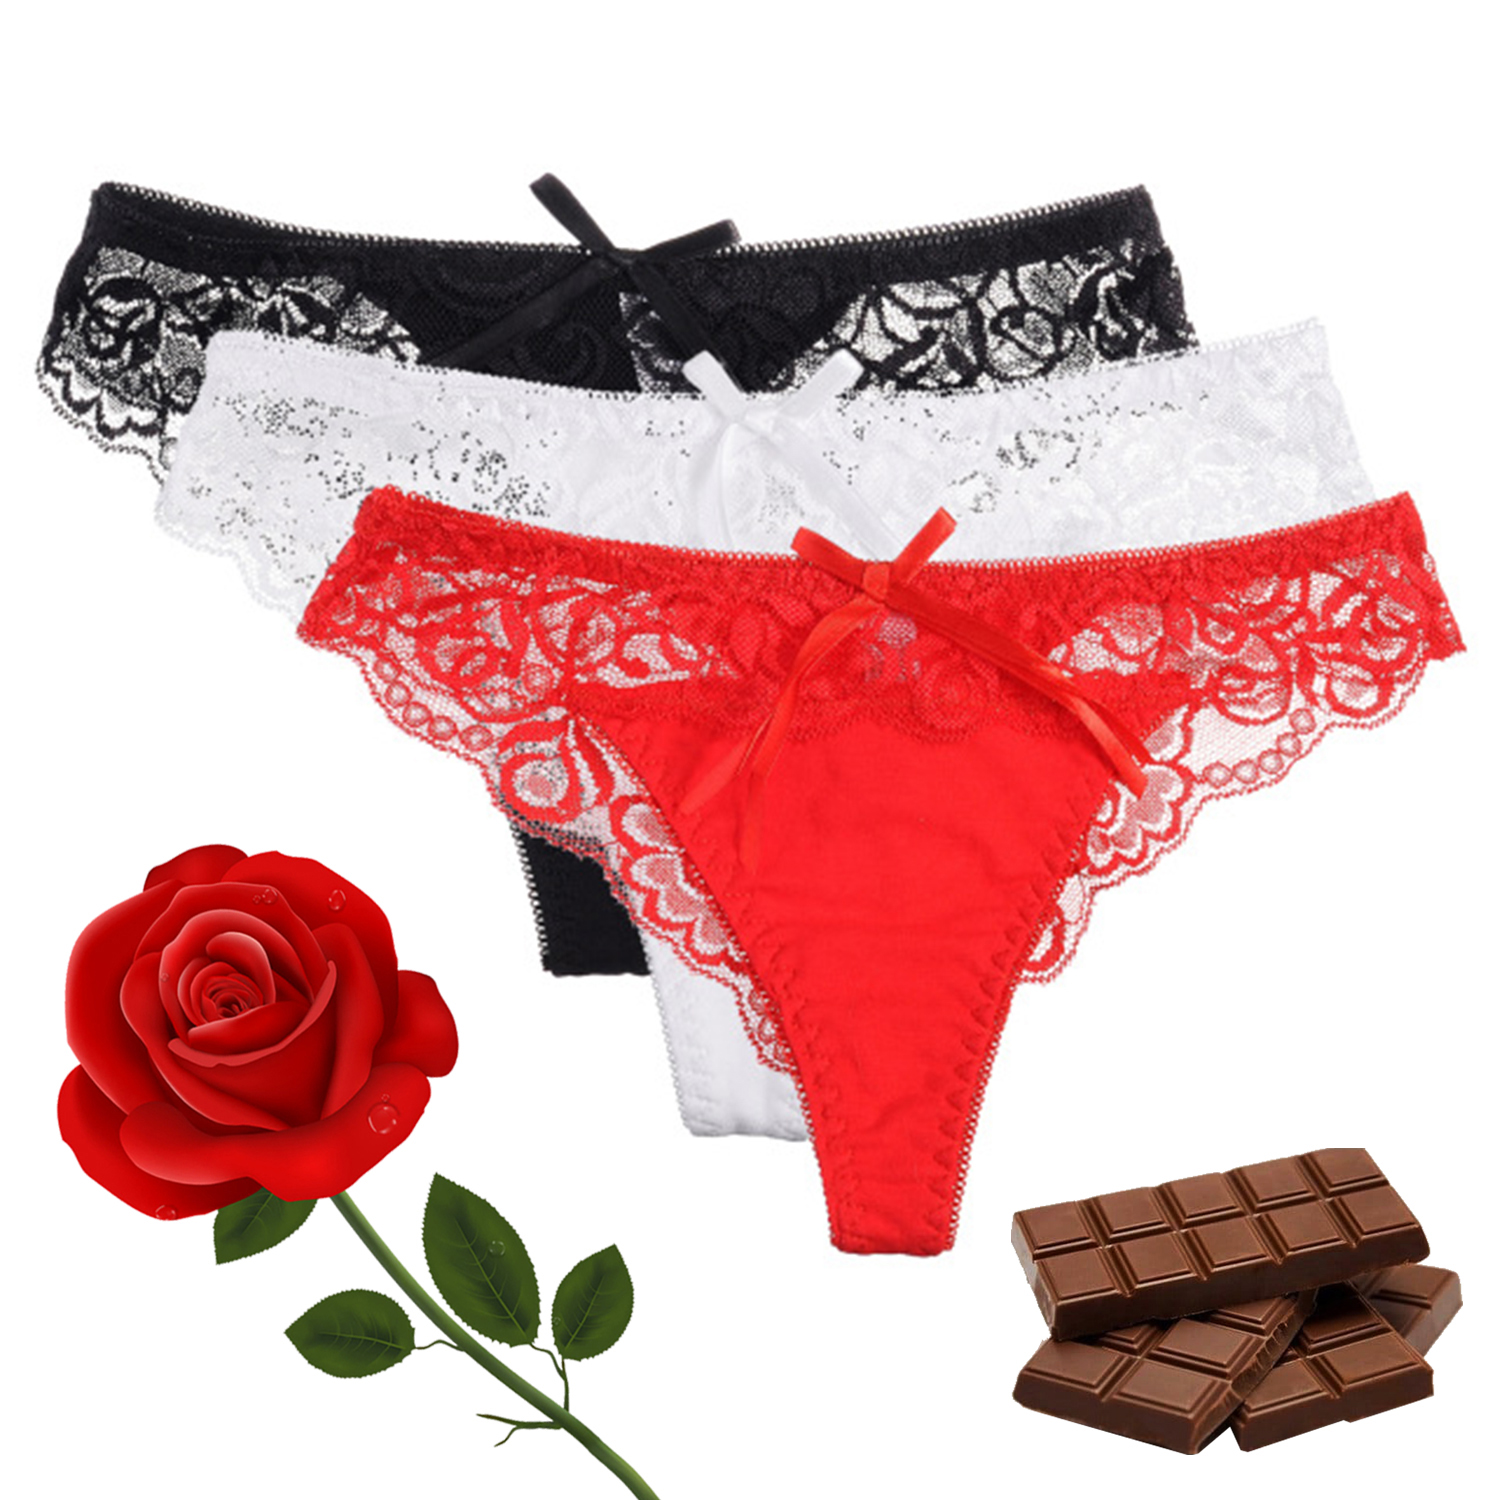 A Pair of Red Pants + A Rose Flower + Chocolate Bars